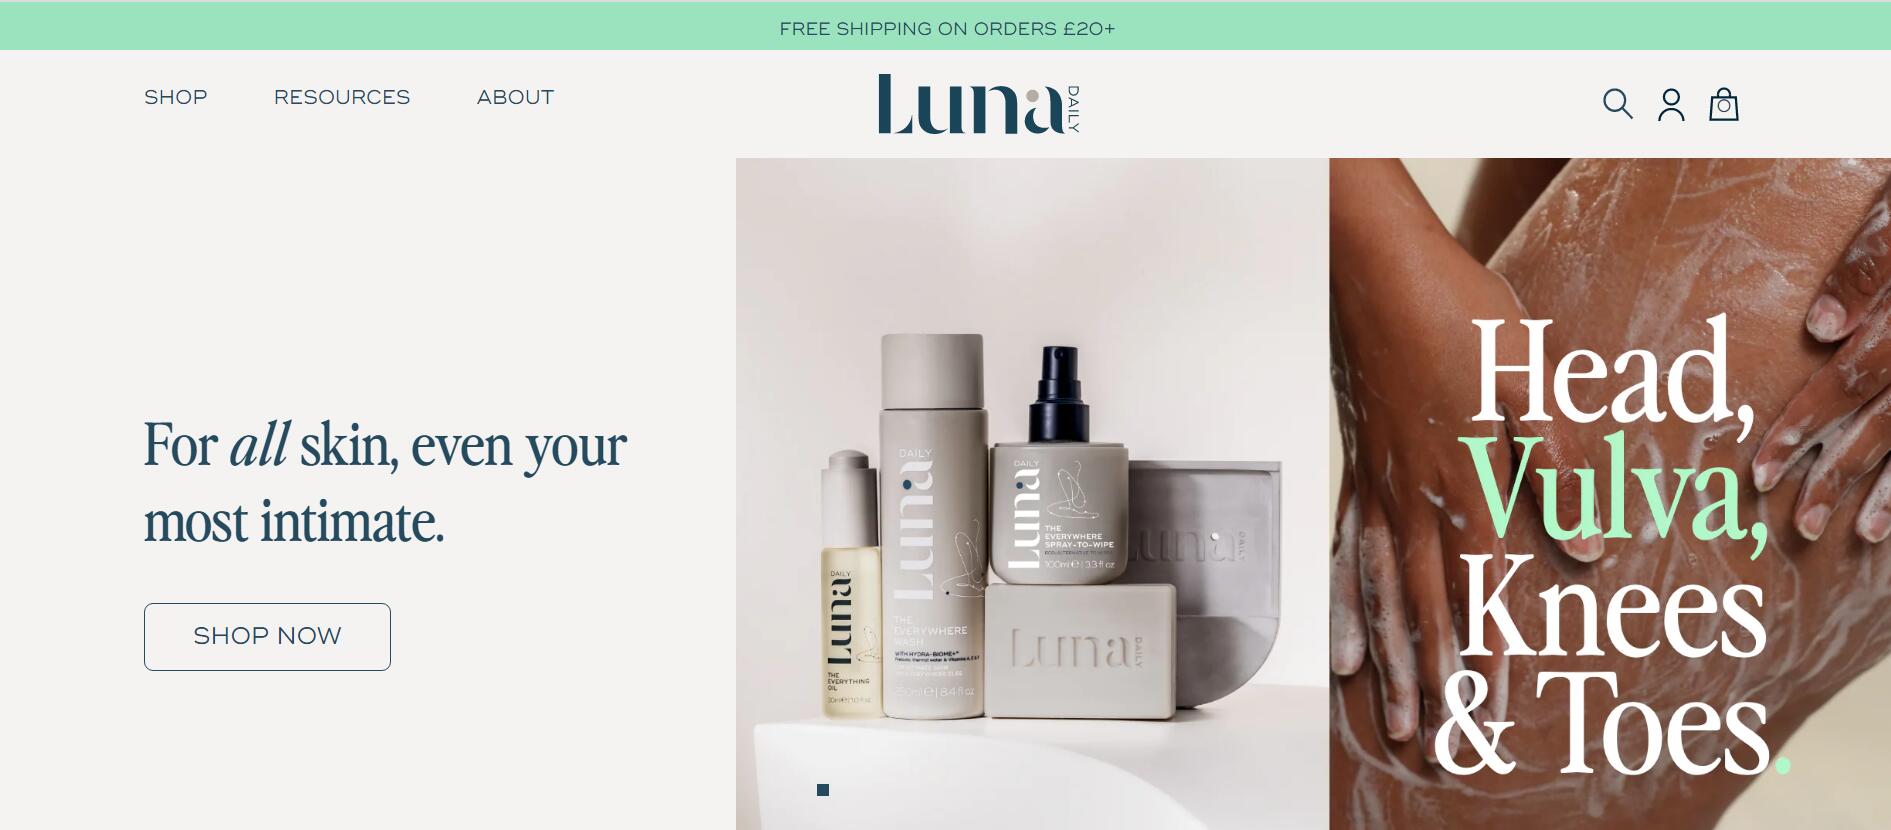 Luna Daily Secures $3.7 Million in Funding and Partners With Sephora to Expand in North American Market